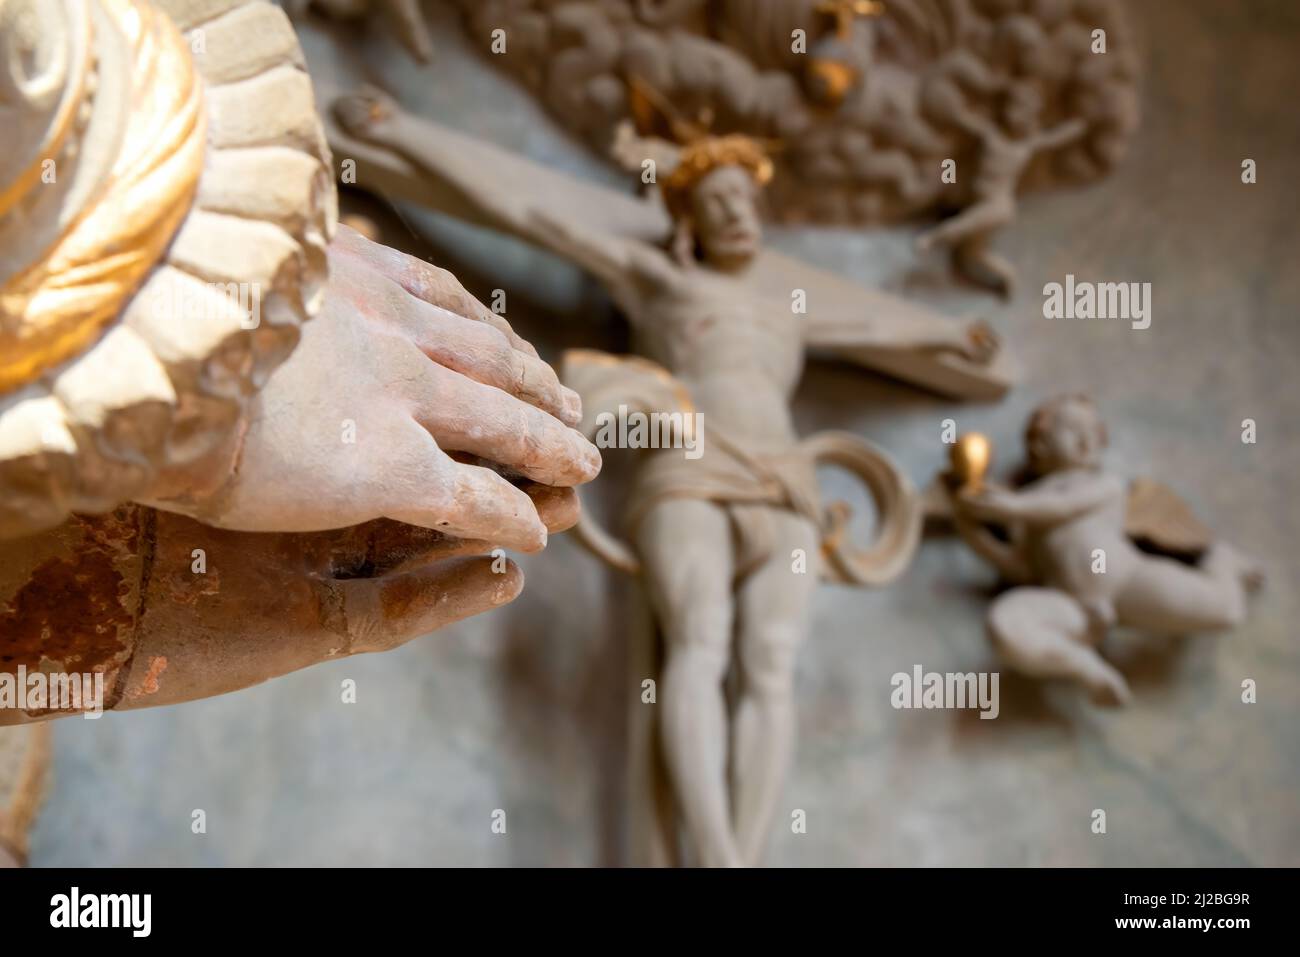 Praying hands with jesus christ on cross in background Stock Photo